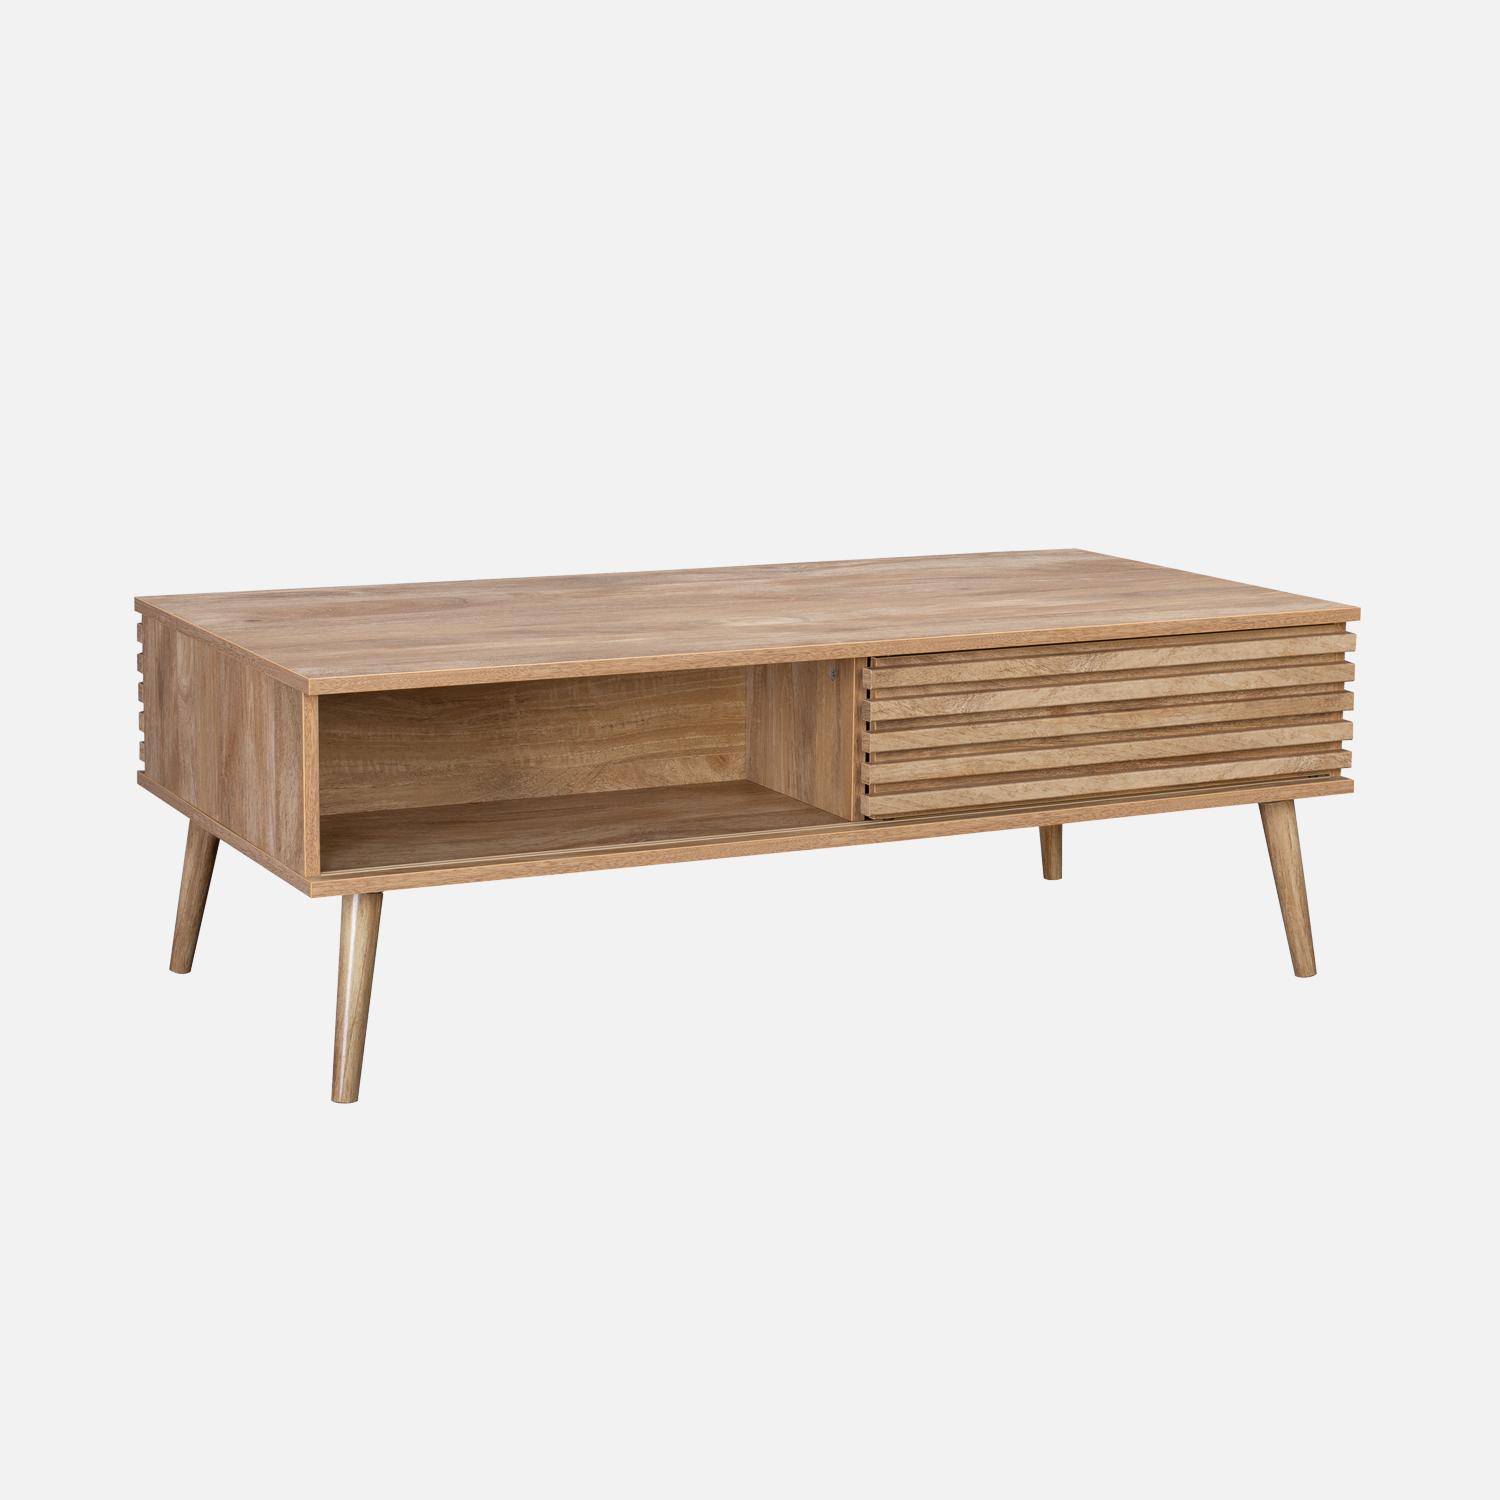 Scandinavian coffee table with grooved wood decor sliding doors and storage niches,sweeek,Photo5